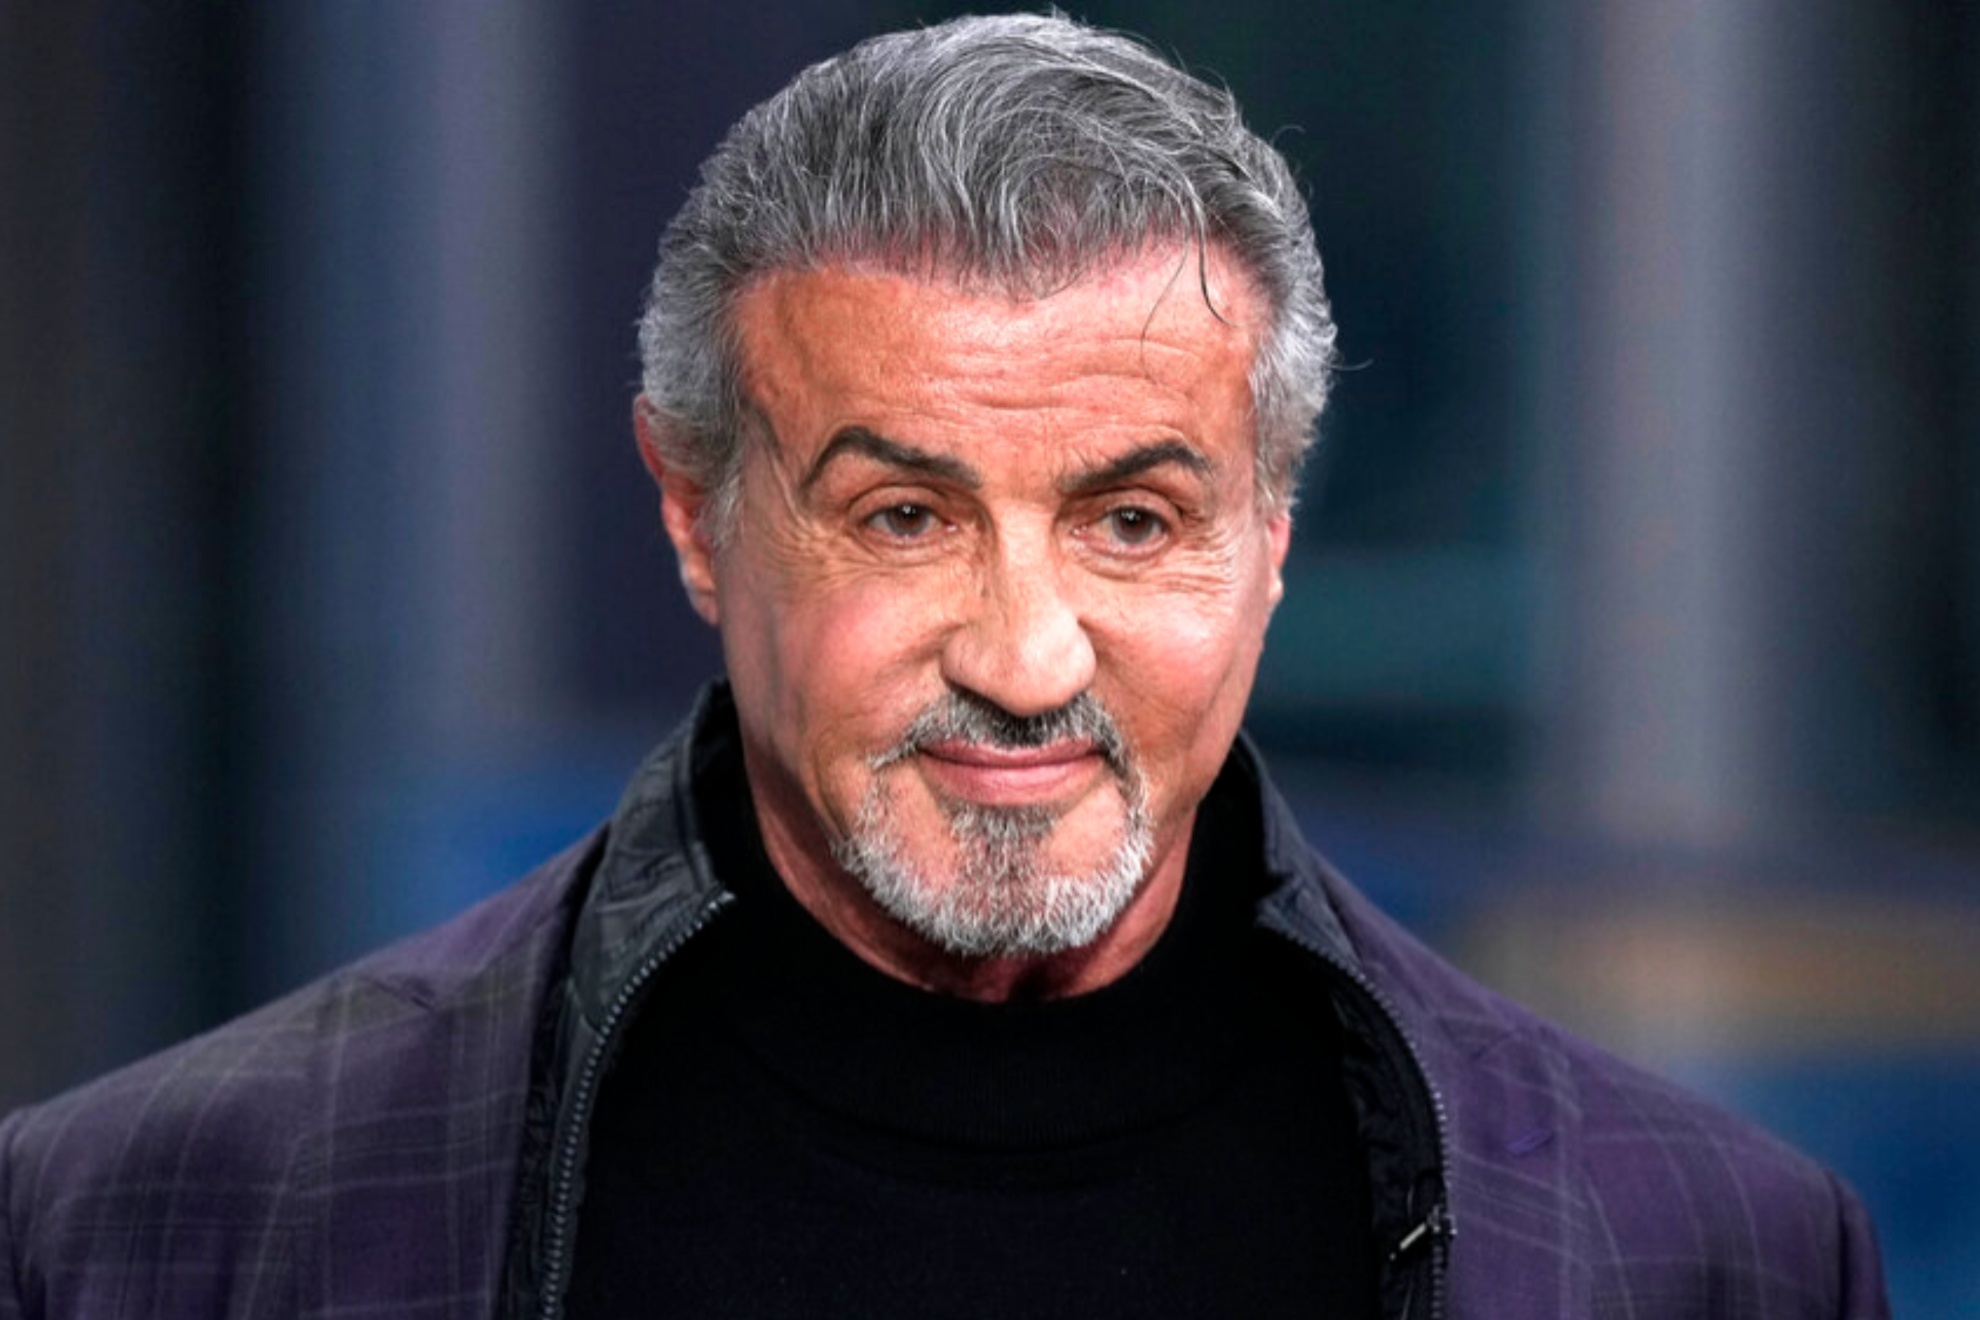 Silvester Stallone has a career spanning more than 60 years in Hollywood